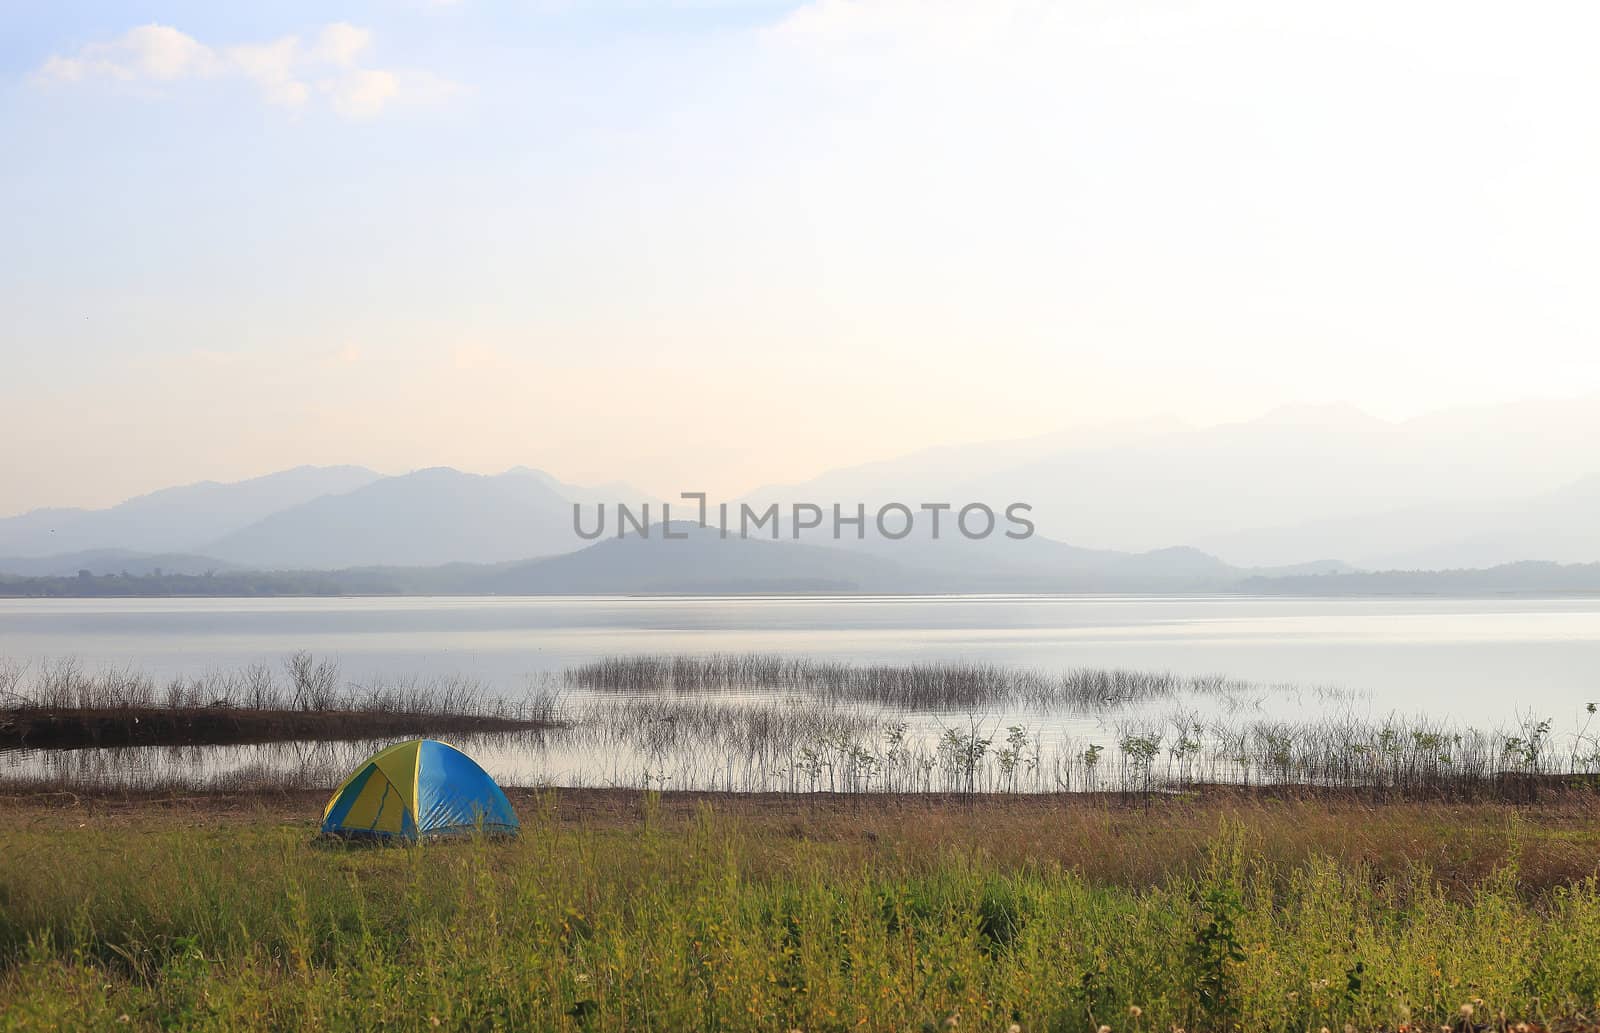 Camping place beside the lake by rufous